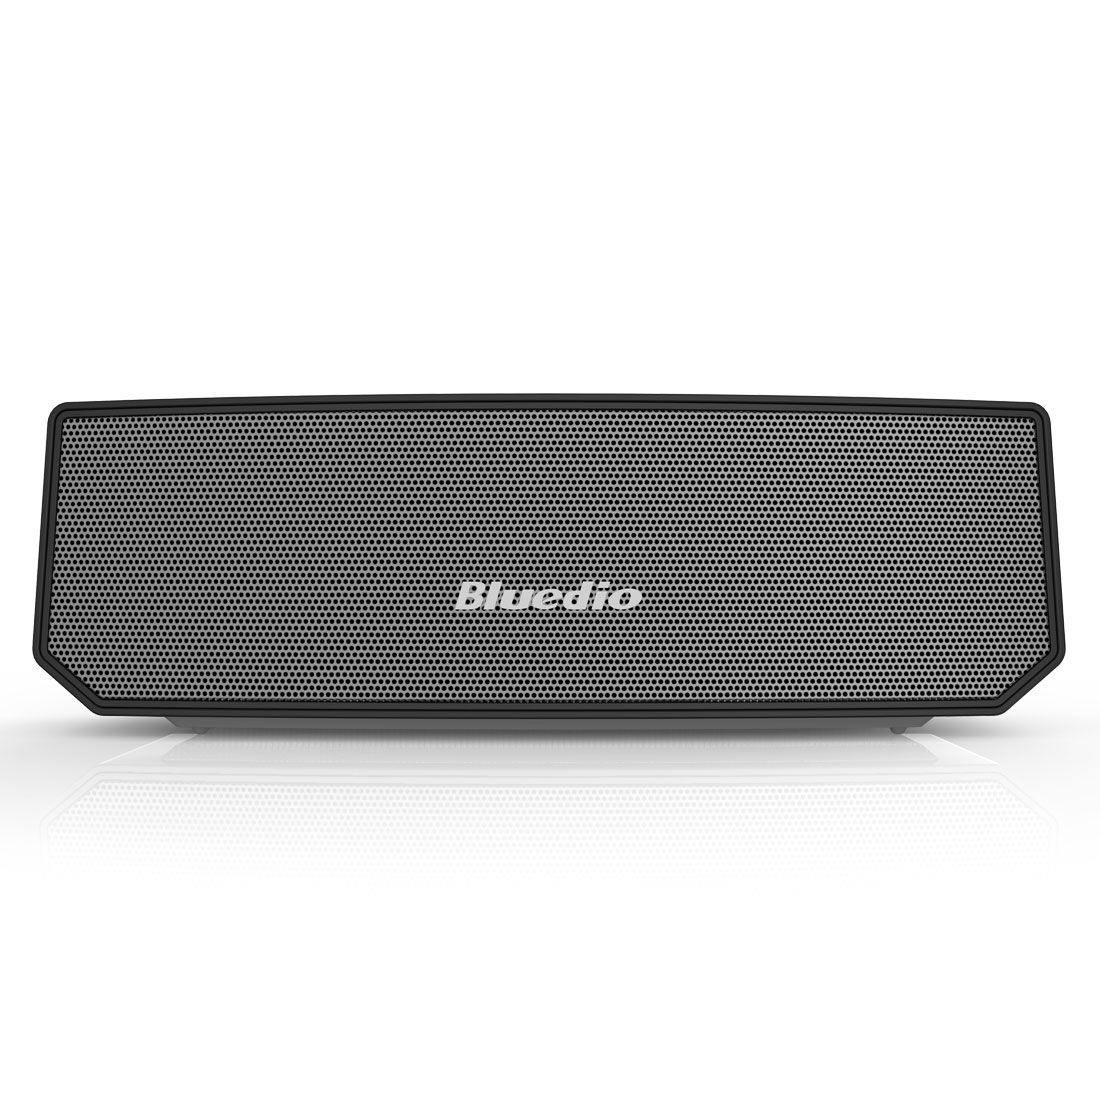 Bluedio BS-3 Camel Portable Bluetooth speaker wireless Subwoofer Soundbar Revolution Magnetic driver 3D stereo music with retail box